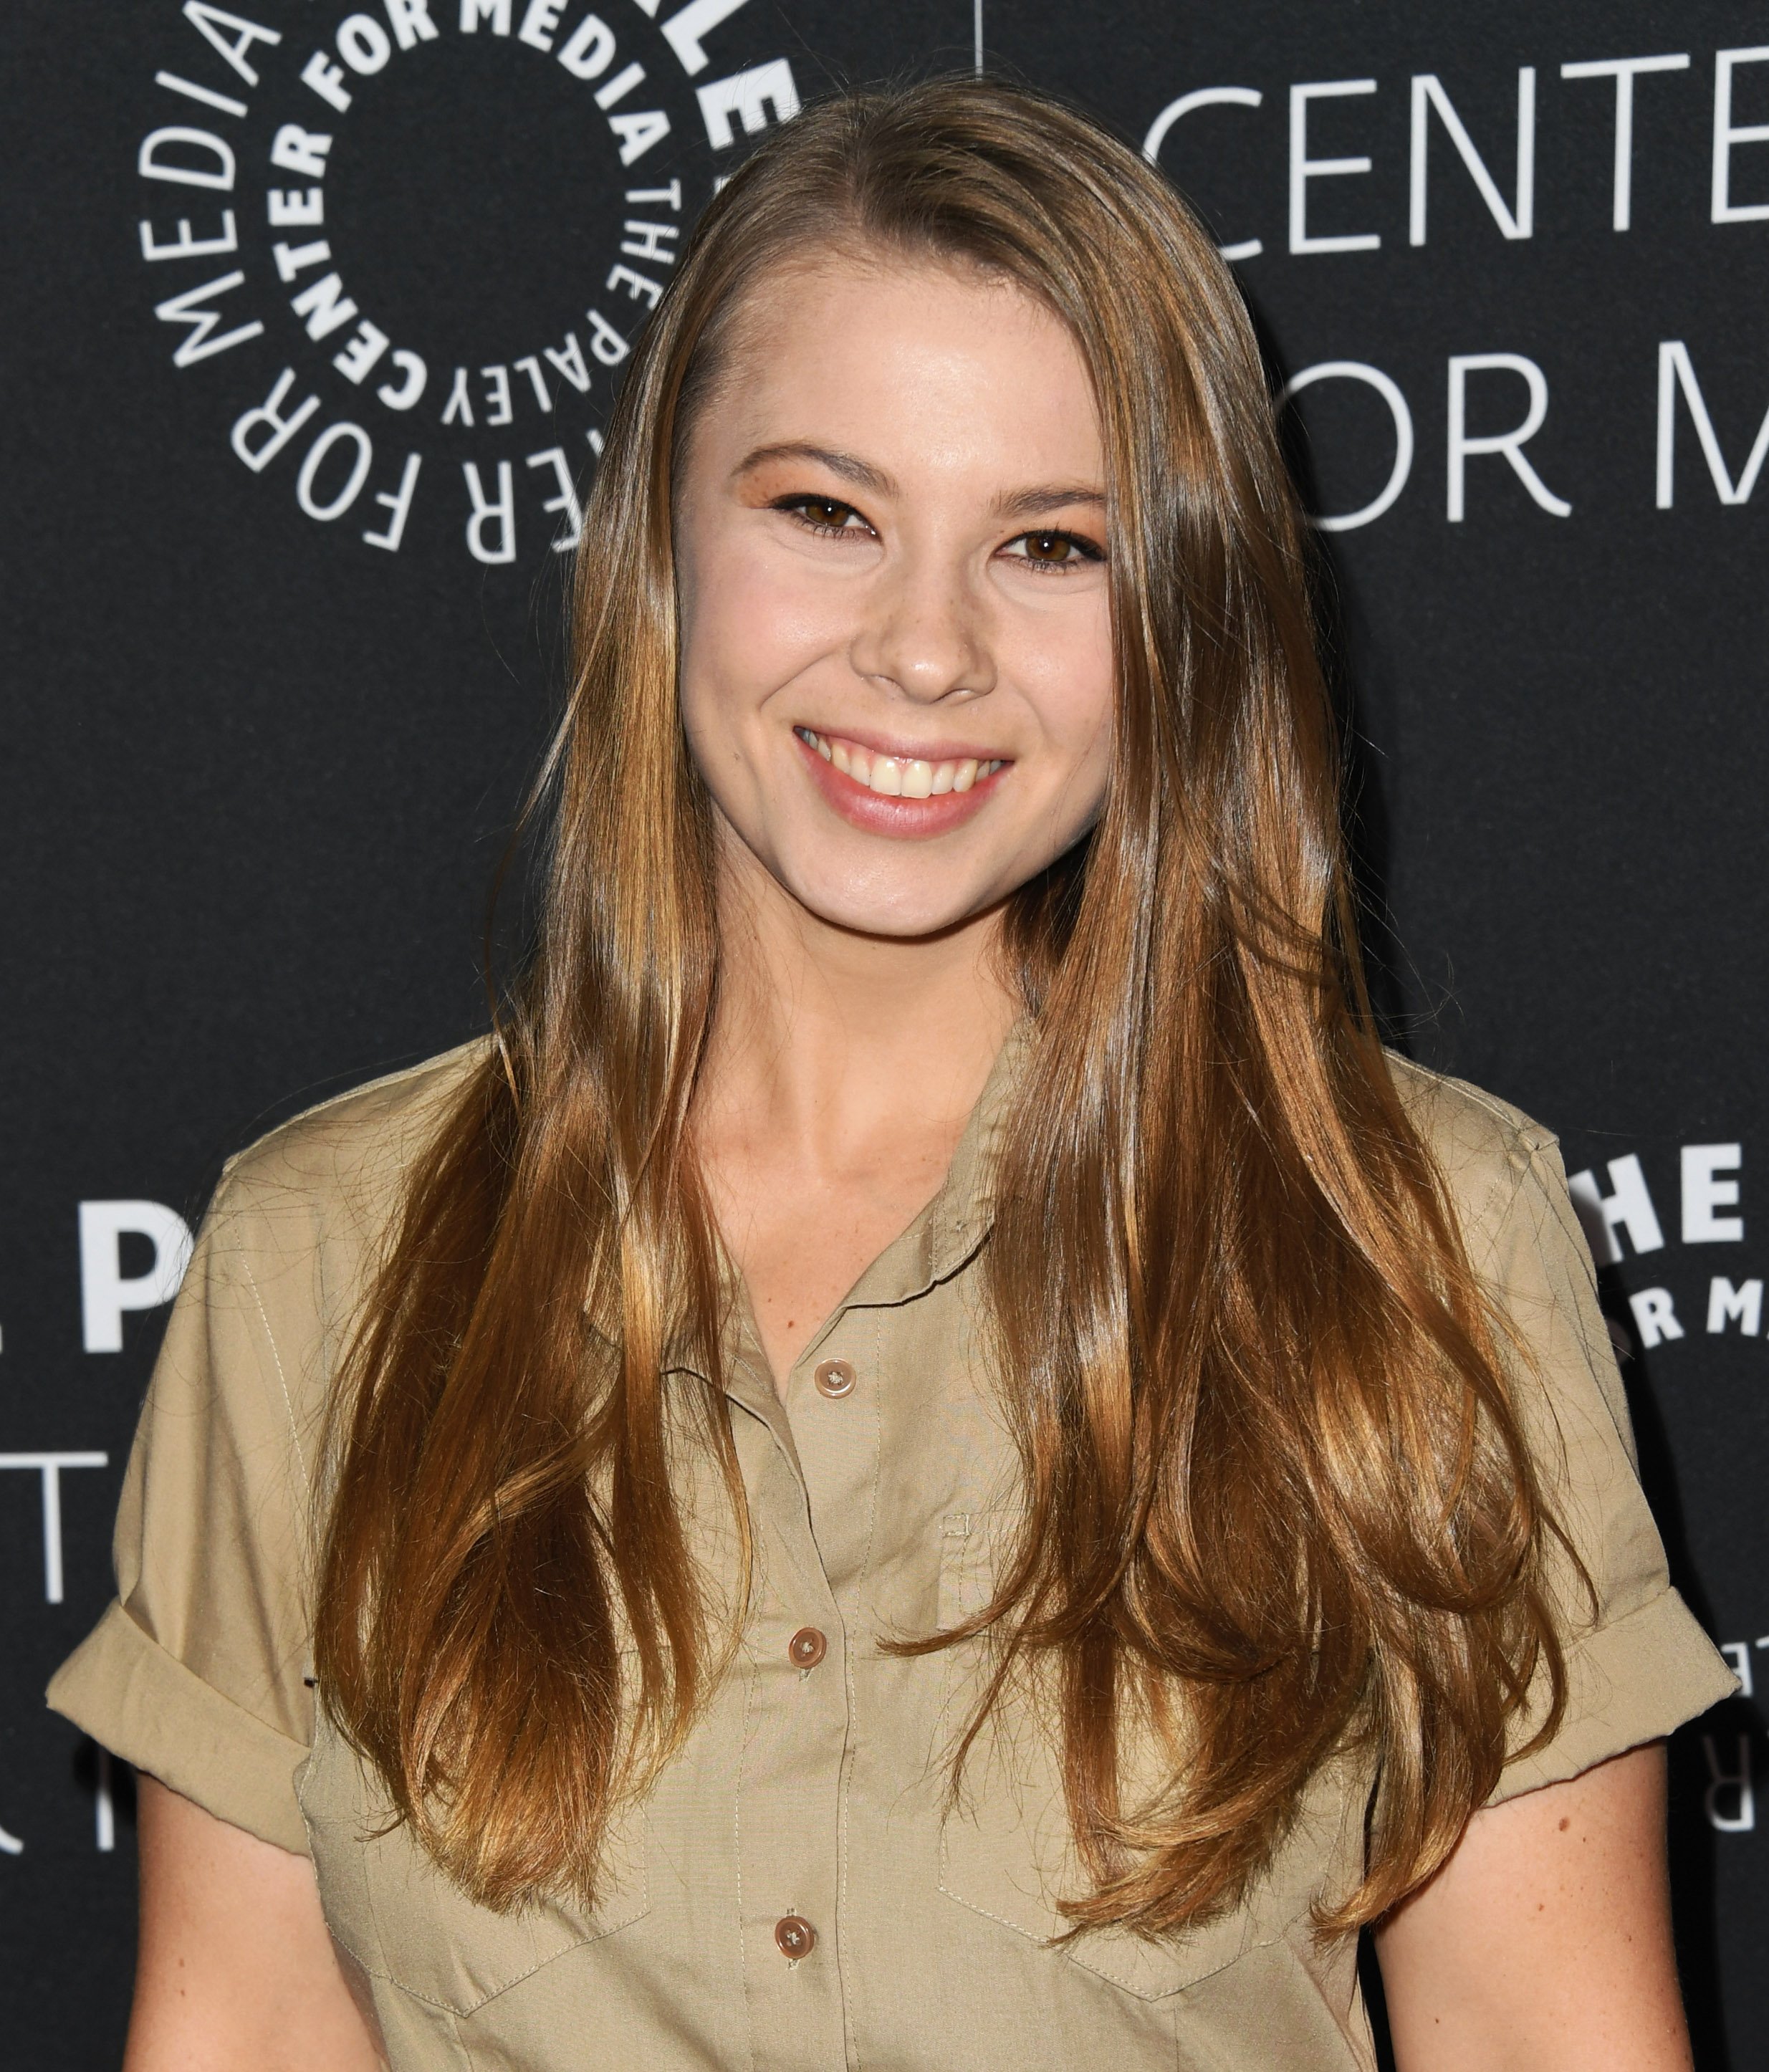 Bindi Irwin attends The Paley Center For Media Presents: An Evening With The Irwins: "Crikey! It's The Irwins" Screening And Conversation at The Paley Center for Media on May 03, 2019 in Beverly Hills, California | Photo: Getty Images